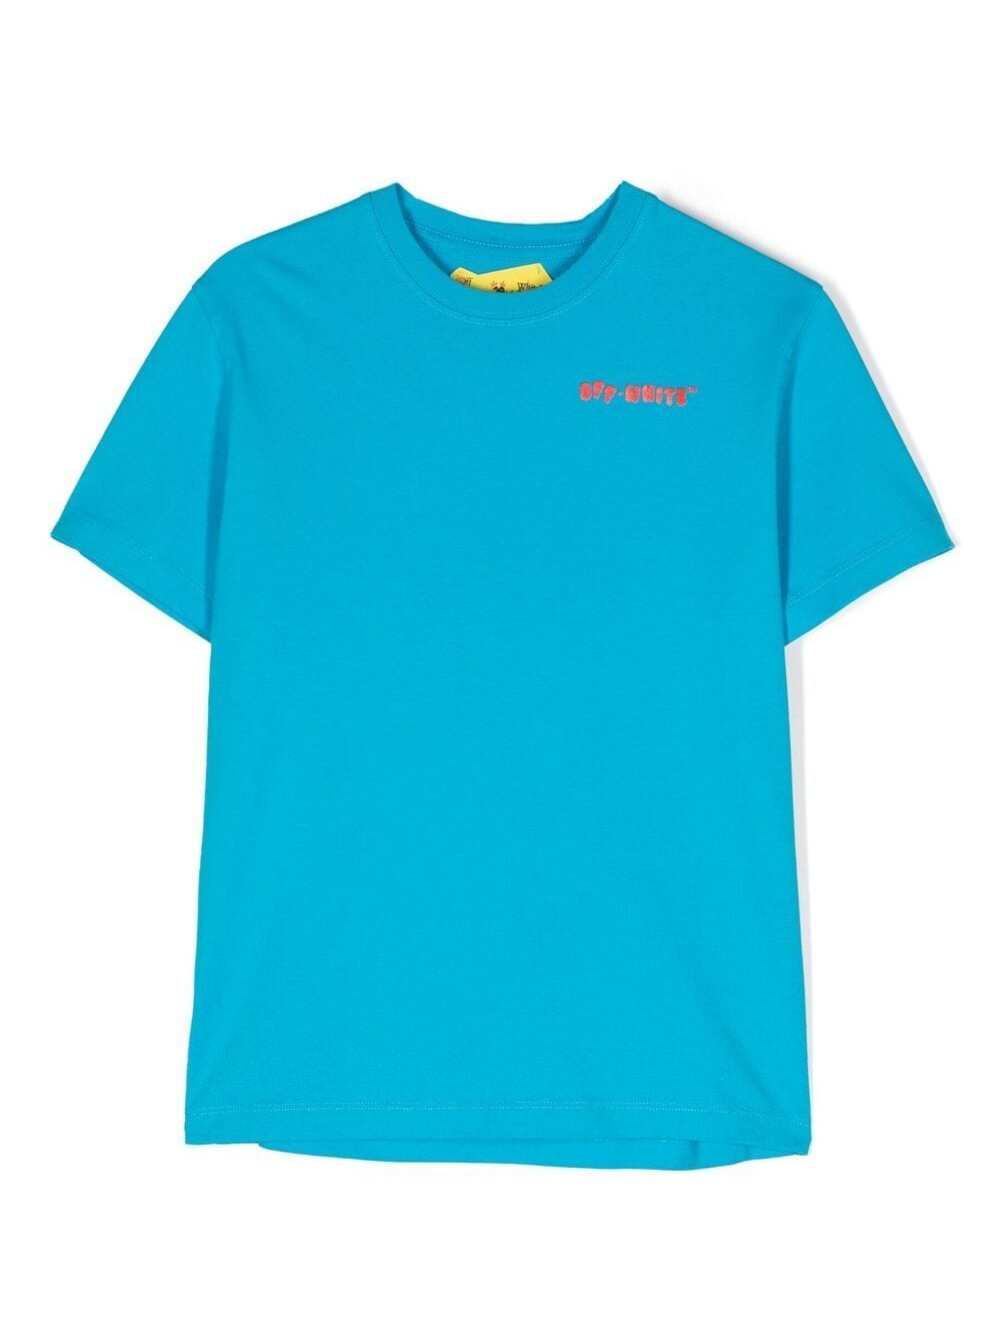 OFF-WHITE T-SHIRT WITH LOGO AND SIGNATURE ARROW MOTIF IN LIGHT-BLUE COTTON BOY